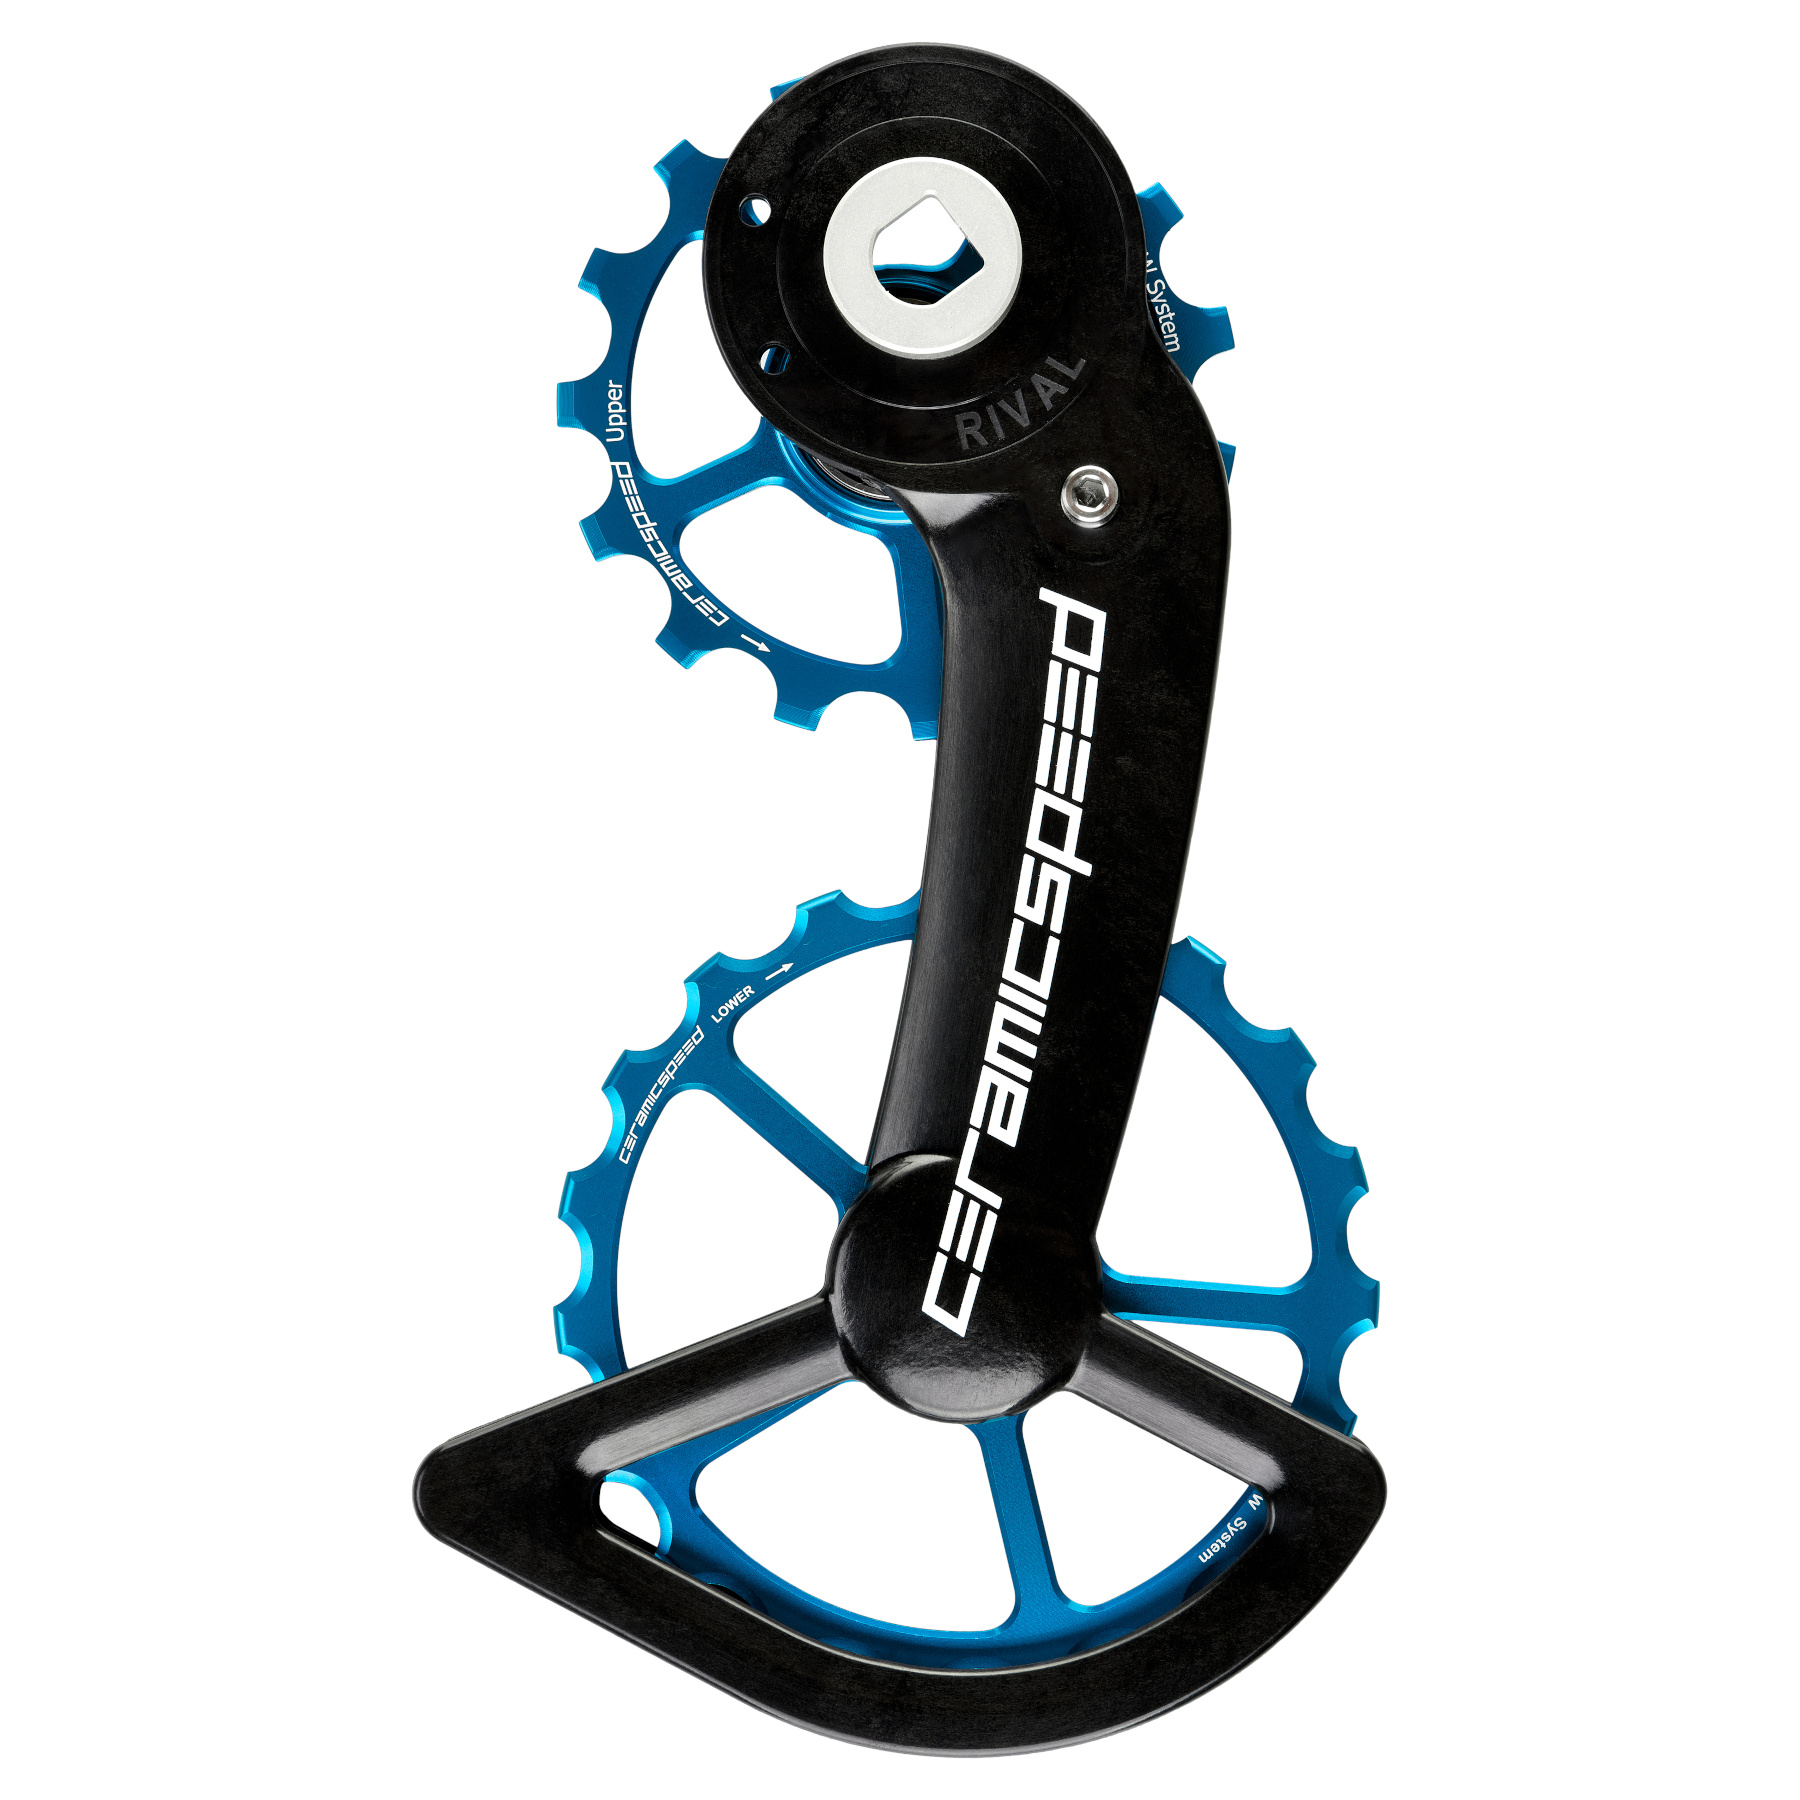 Picture of CeramicSpeed OSPW Derailleur Pulley System - for SRAM Rival AXS | 15/19 Teeth - Alternative Blue